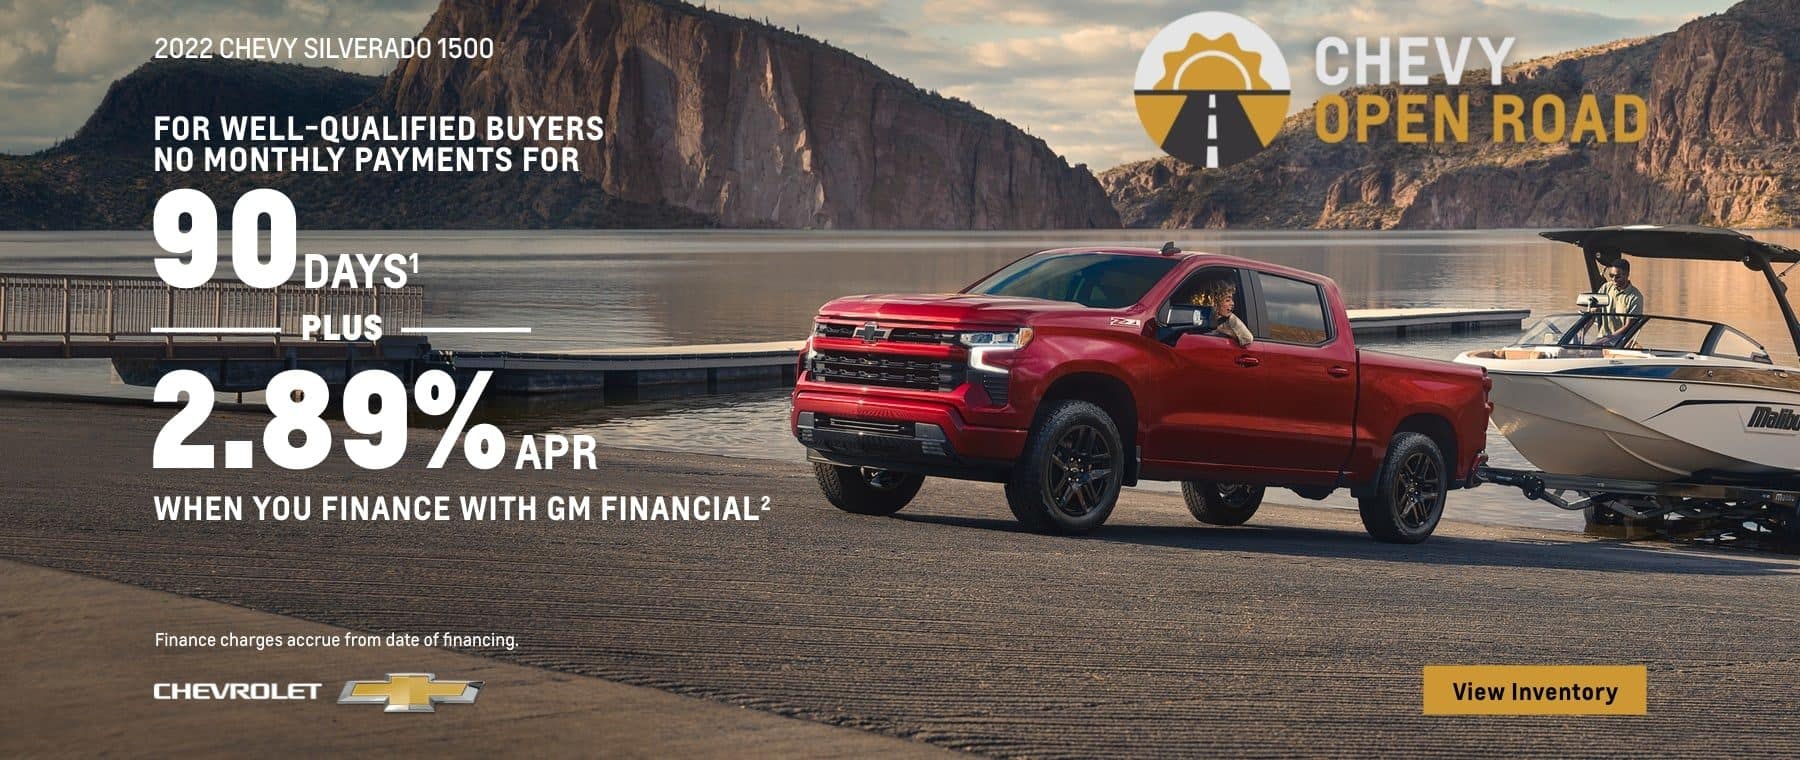 2022 Chevy Silverado 1500. Chevy Open Road. For well-qualified buyers. No monthly payments for 90 days. Plus, 2.89% APR when you finance with GM Financial. Finance charges accrue from date of financing.